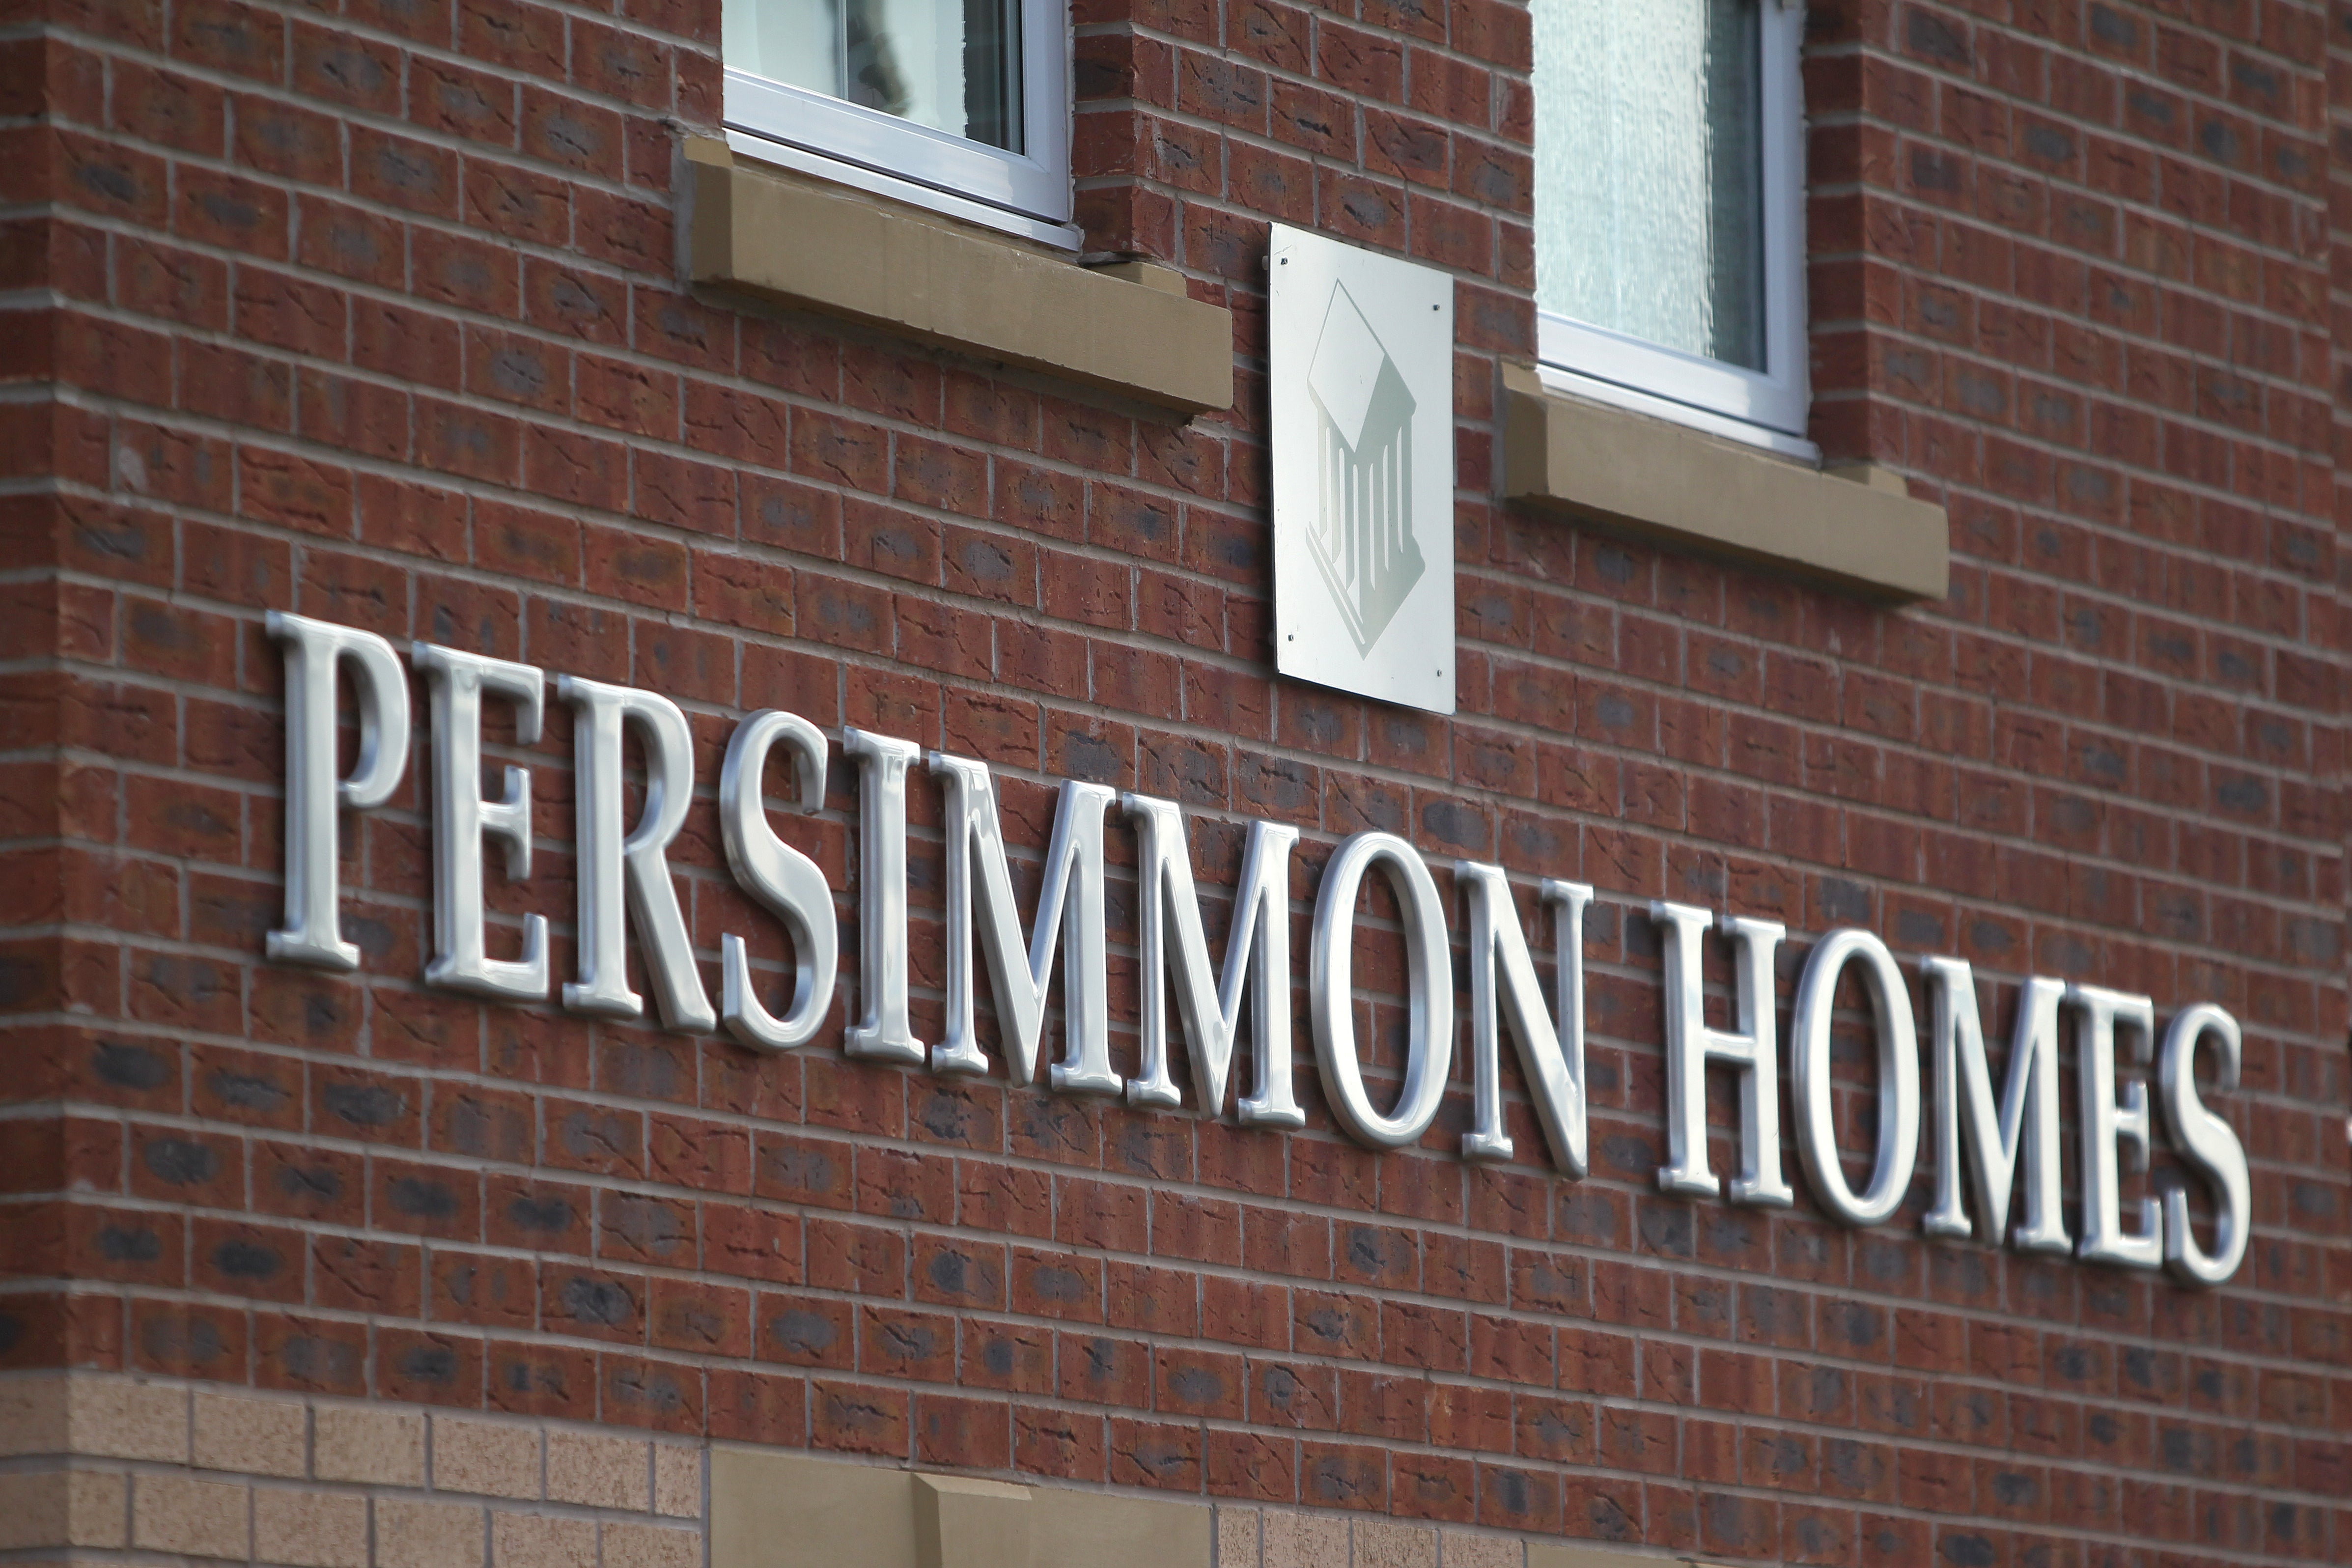 Housebuilding giant Persimmon has cheered ‘healthy’ home buyer demand (Mike Egerton/PA)